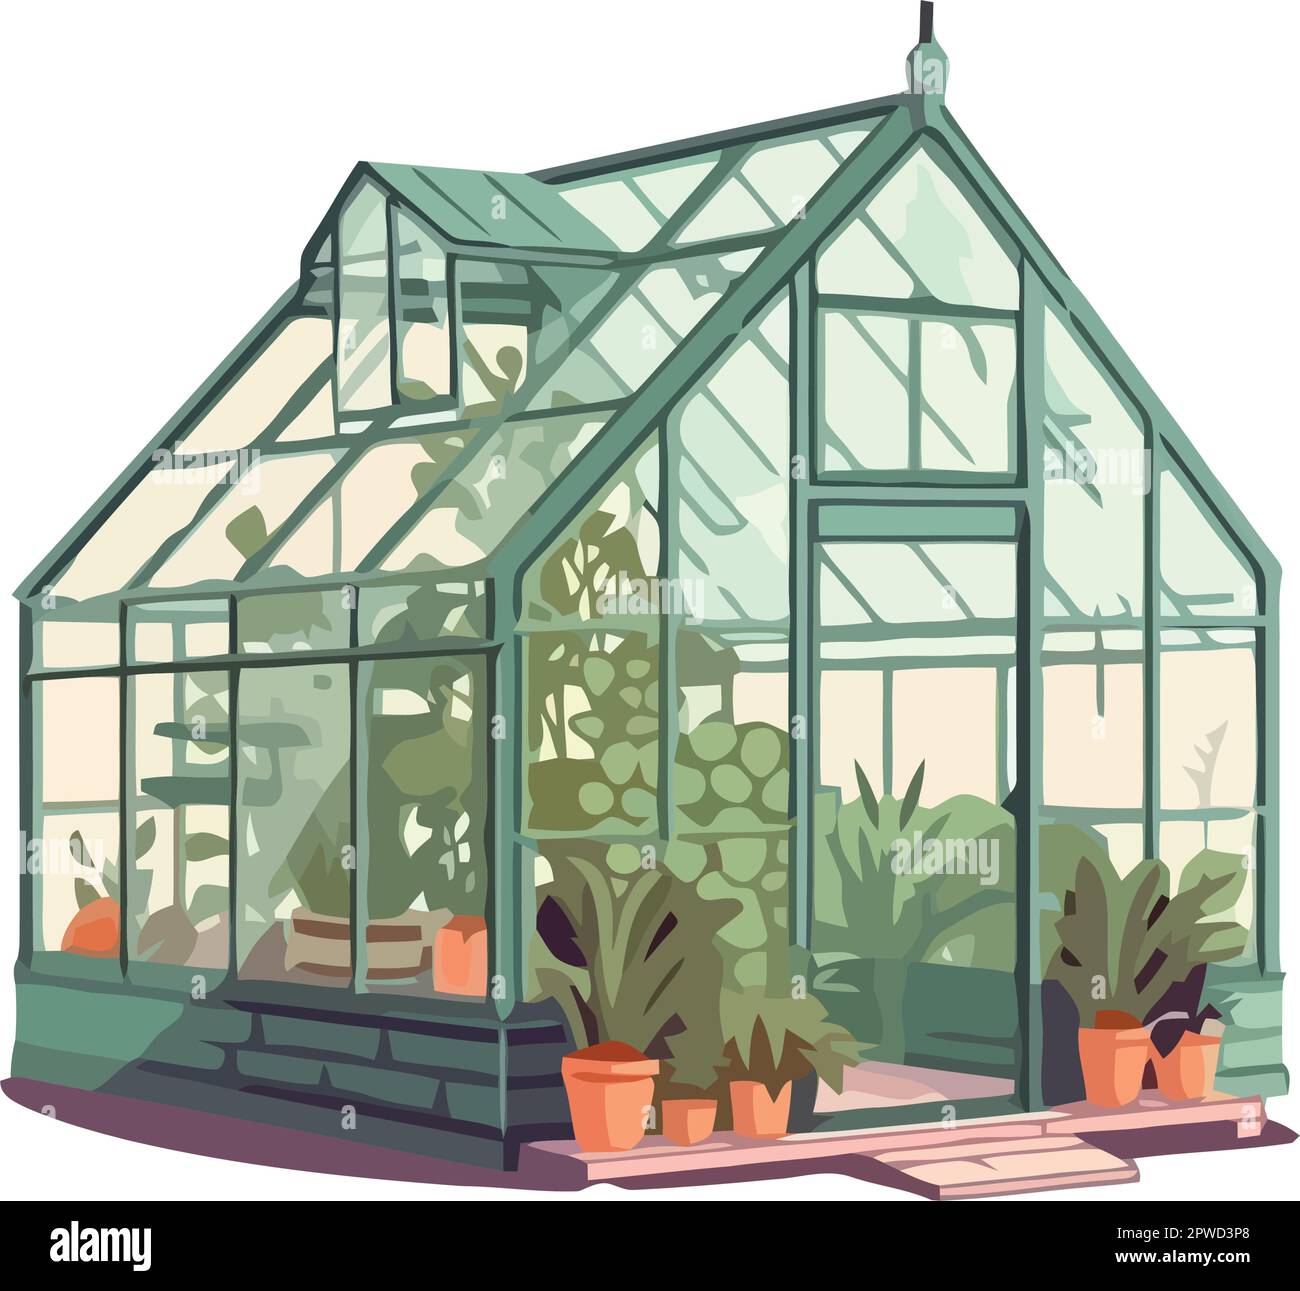 Greenhouse architecture with potted plants inside Stock Vector